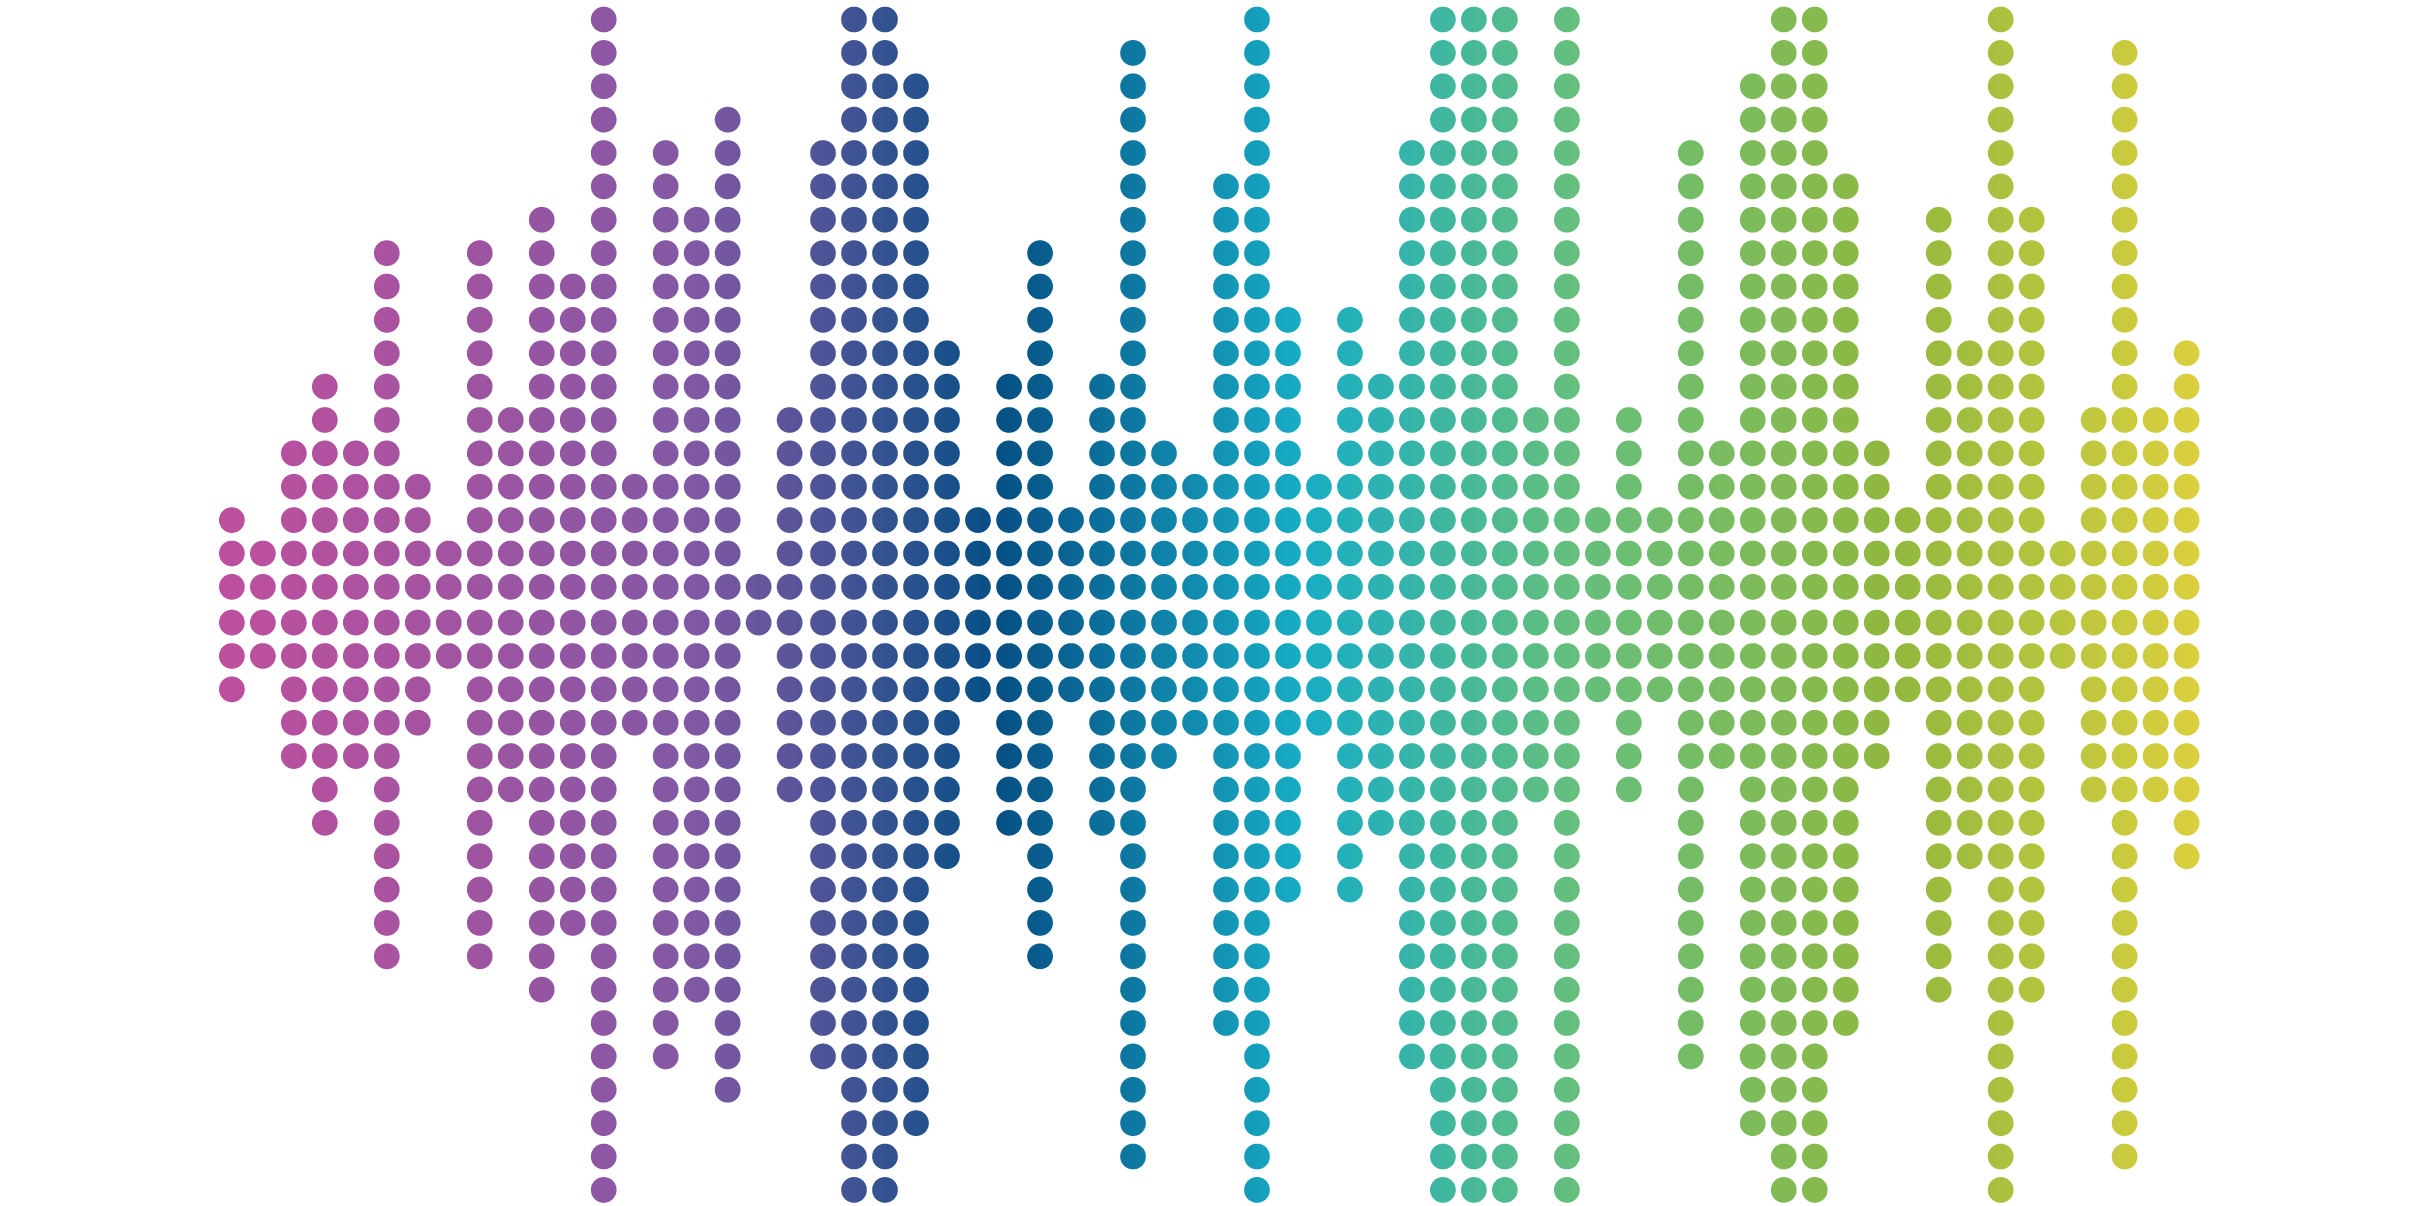 Colored dots arranged in a sound wave shape